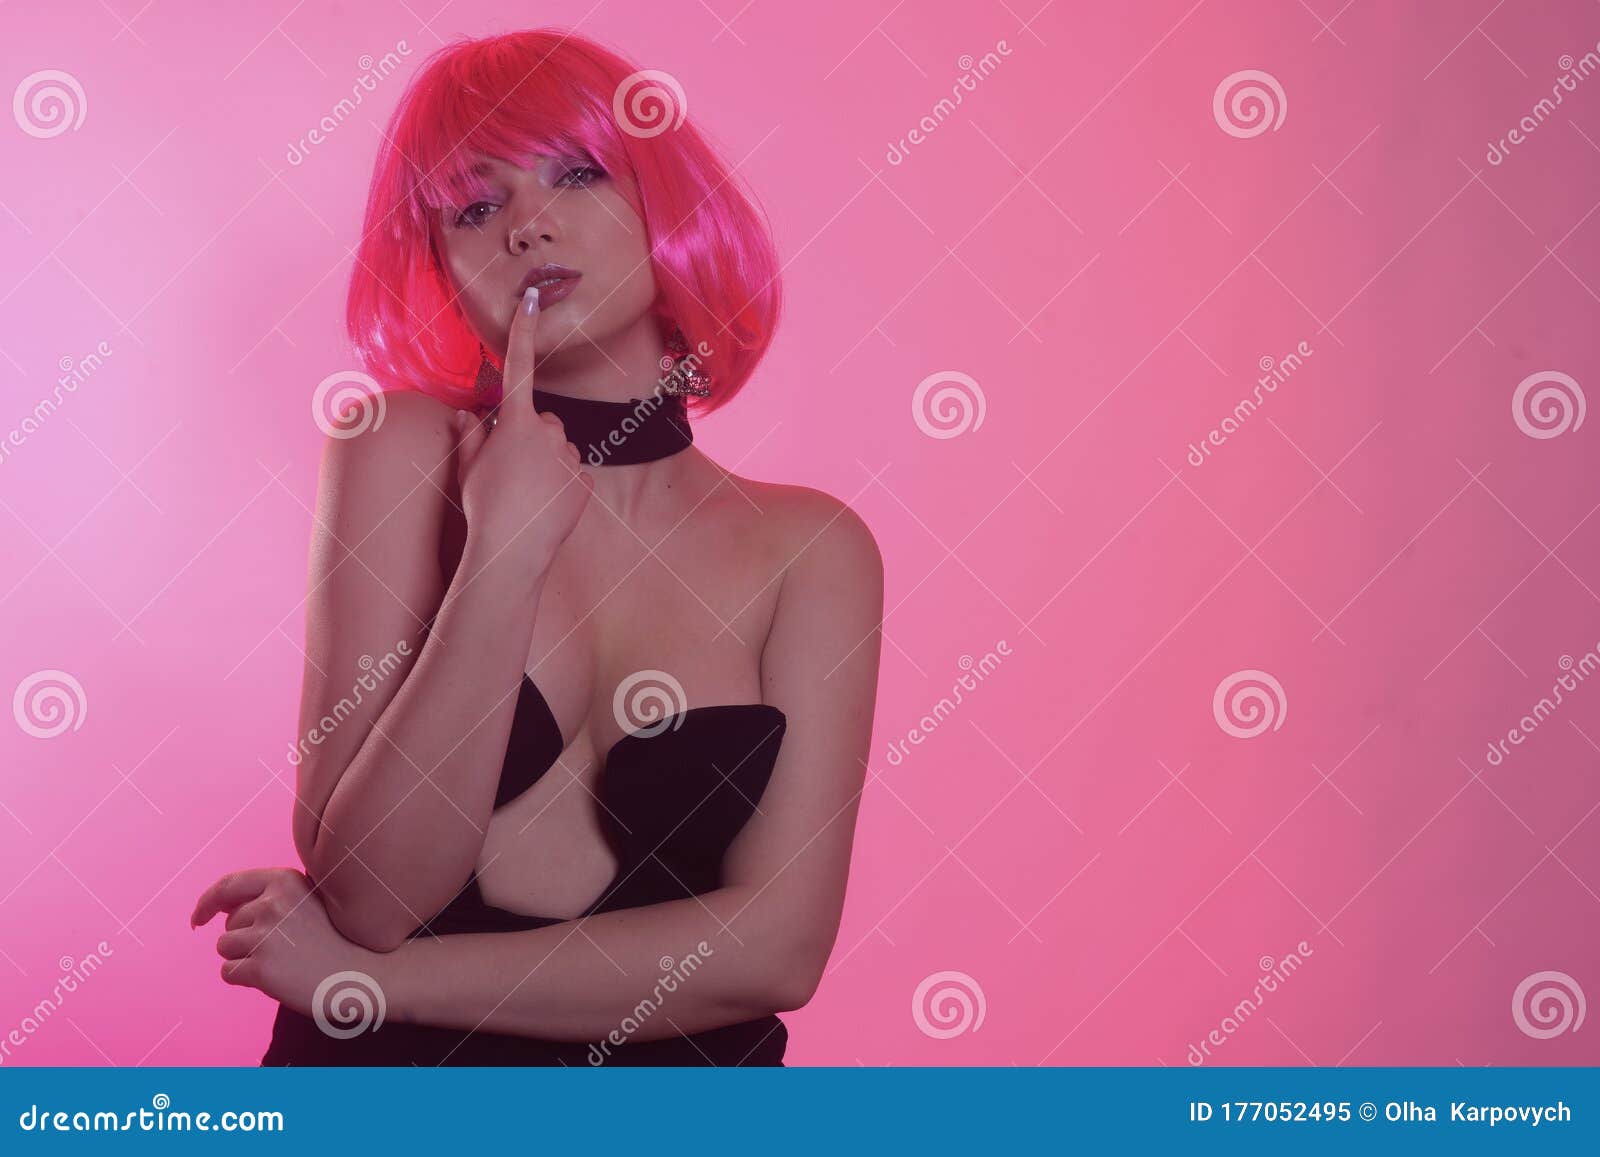 model with pink short hair in a black stylish dress. posh girl posing. very bright image. girl with a quack on a pink background.